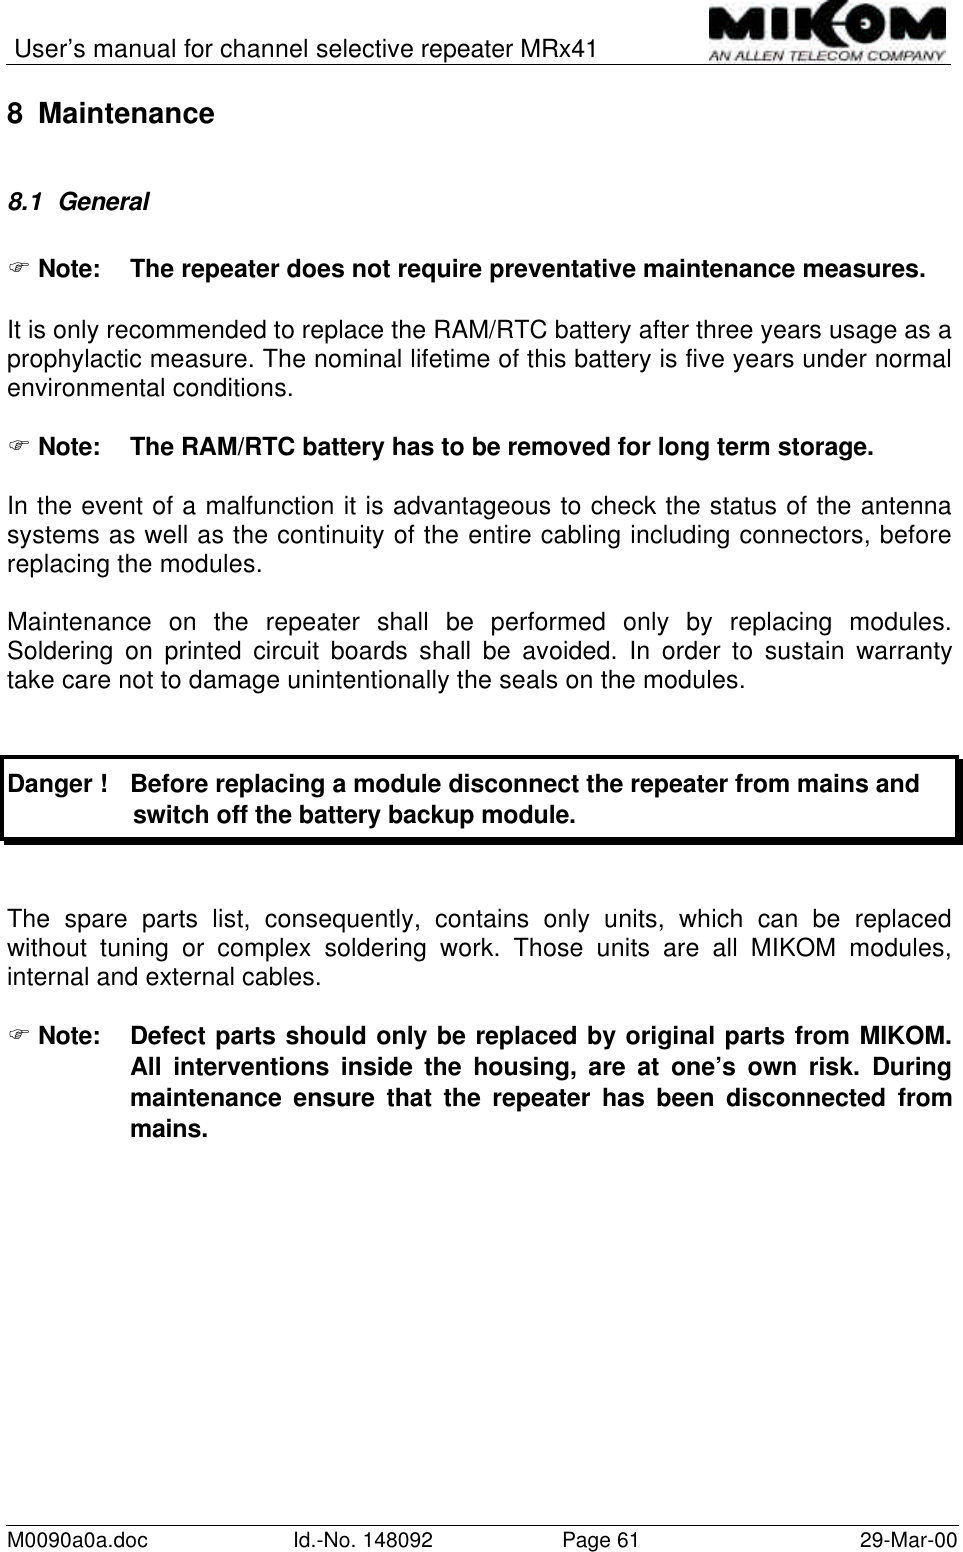 User’s manual for channel selective repeater MRx41M0090a0a.doc Id.-No. 148092 Page 61 29-Mar-008 Maintenance8.1 GeneralF Note:  The repeater does not require preventative maintenance measures.It is only recommended to replace the RAM/RTC battery after three years usage as aprophylactic measure. The nominal lifetime of this battery is five years under normalenvironmental conditions.F Note:  The RAM/RTC battery has to be removed for long term storage.In the event of a malfunction it is advantageous to check the status of the antennasystems as well as the continuity of the entire cabling including connectors, beforereplacing the modules.Maintenance on the repeater shall be performed only by replacing modules.Soldering on printed circuit boards shall be avoided. In order to sustain warrantytake care not to damage unintentionally the seals on the modules.Danger ! Before replacing a module disconnect the repeater from mains and                  switch off the battery backup module.The spare parts list, consequently, contains only units, which can be replacedwithout tuning or complex soldering work. Those units are all MIKOM modules,internal and external cables.F Note:  Defect parts should only be replaced by original parts from MIKOM.All interventions inside the housing, are at one’s own risk. Duringmaintenance ensure that the repeater has been disconnected frommains.